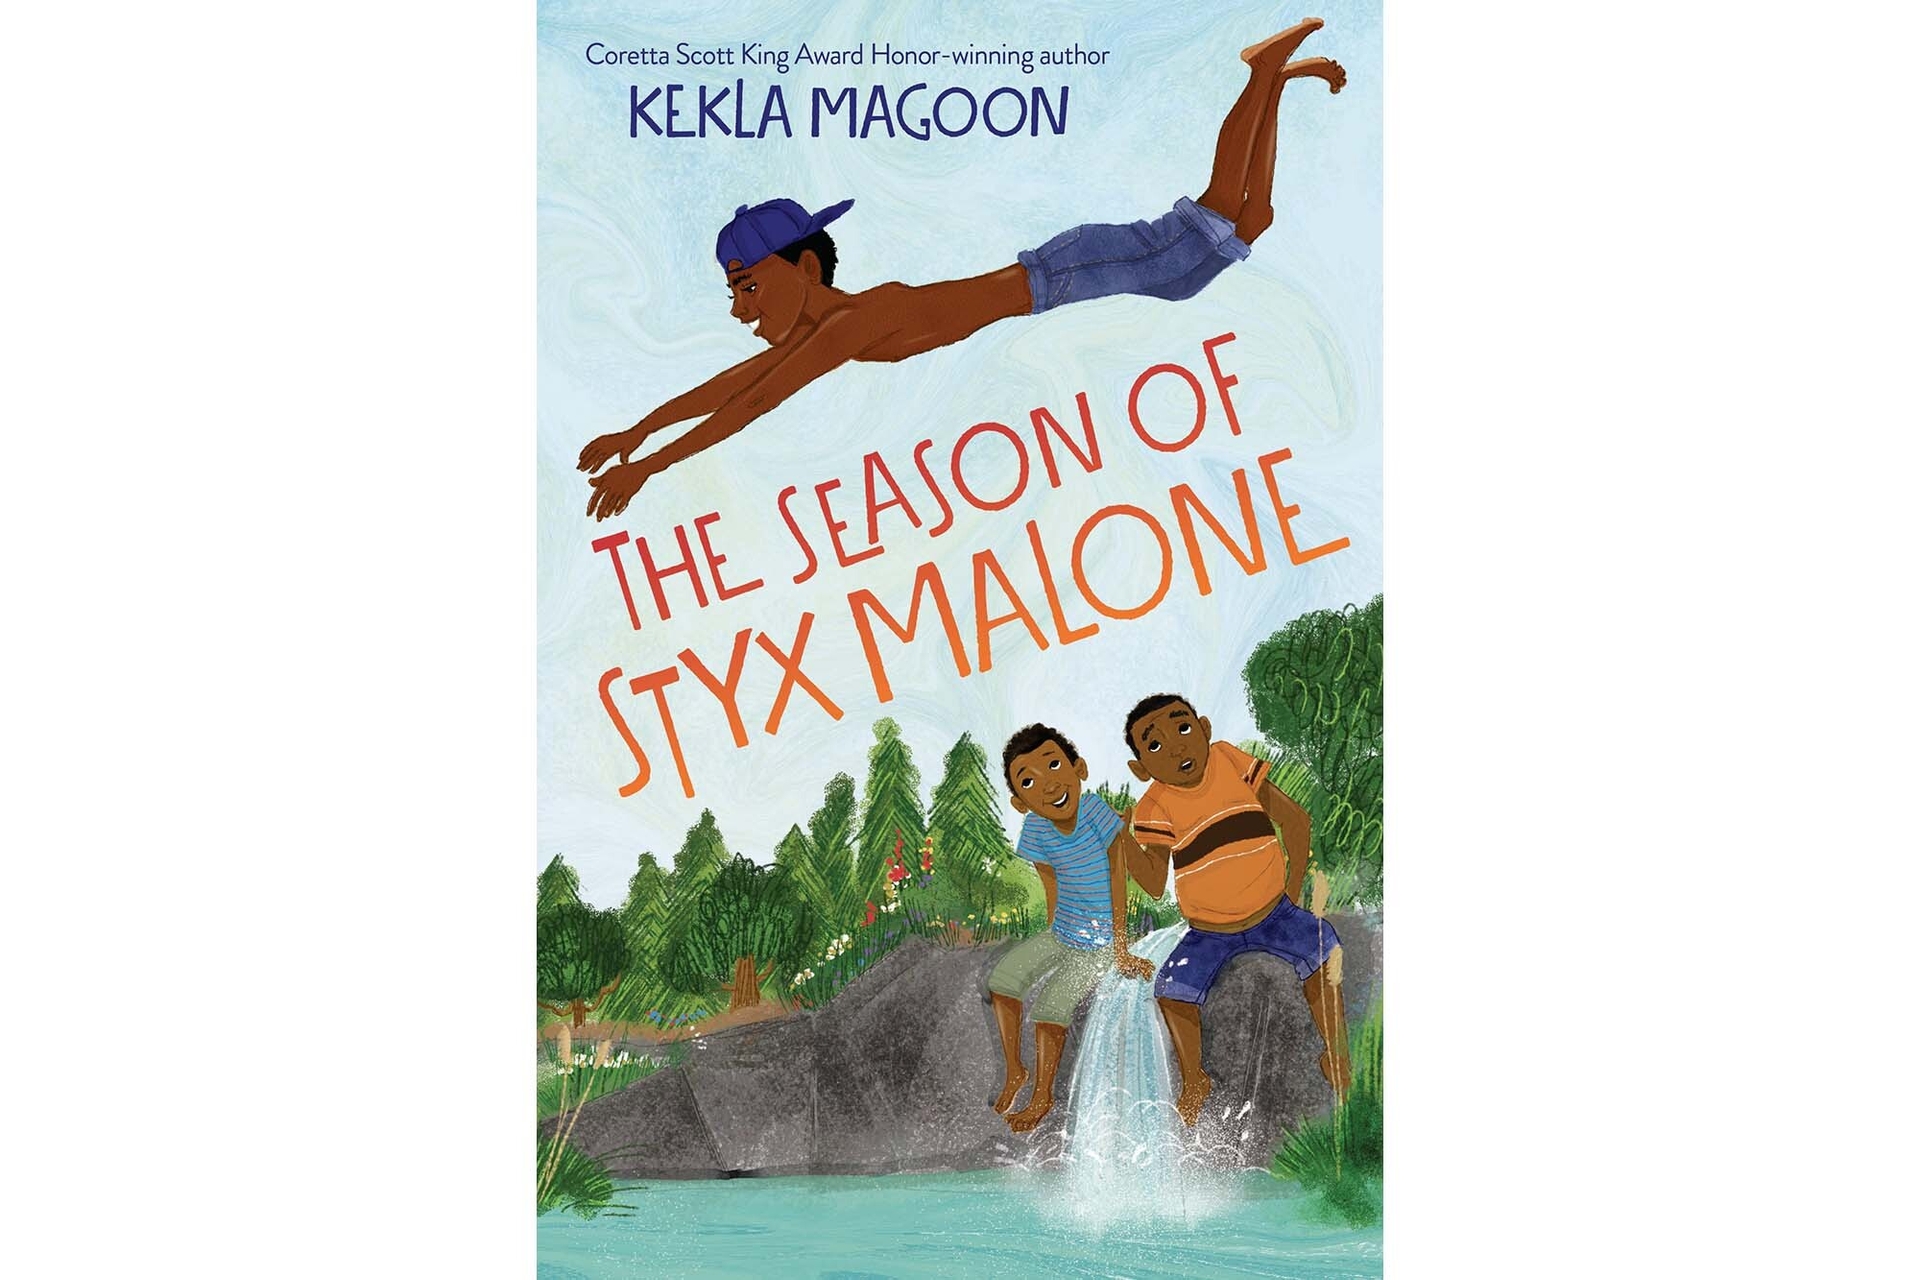 Best books of the year for children, "The Season of Styx Malone" by Kekla Magoon. In the image, a boy wearing a backwards baseball cap and swim trunks dives into a body of water. Below him sit two boys, sitting on a large rock, looking up toward the first boy. Both boys wear a t-shirt and shorts. In the background are trees and the sky.